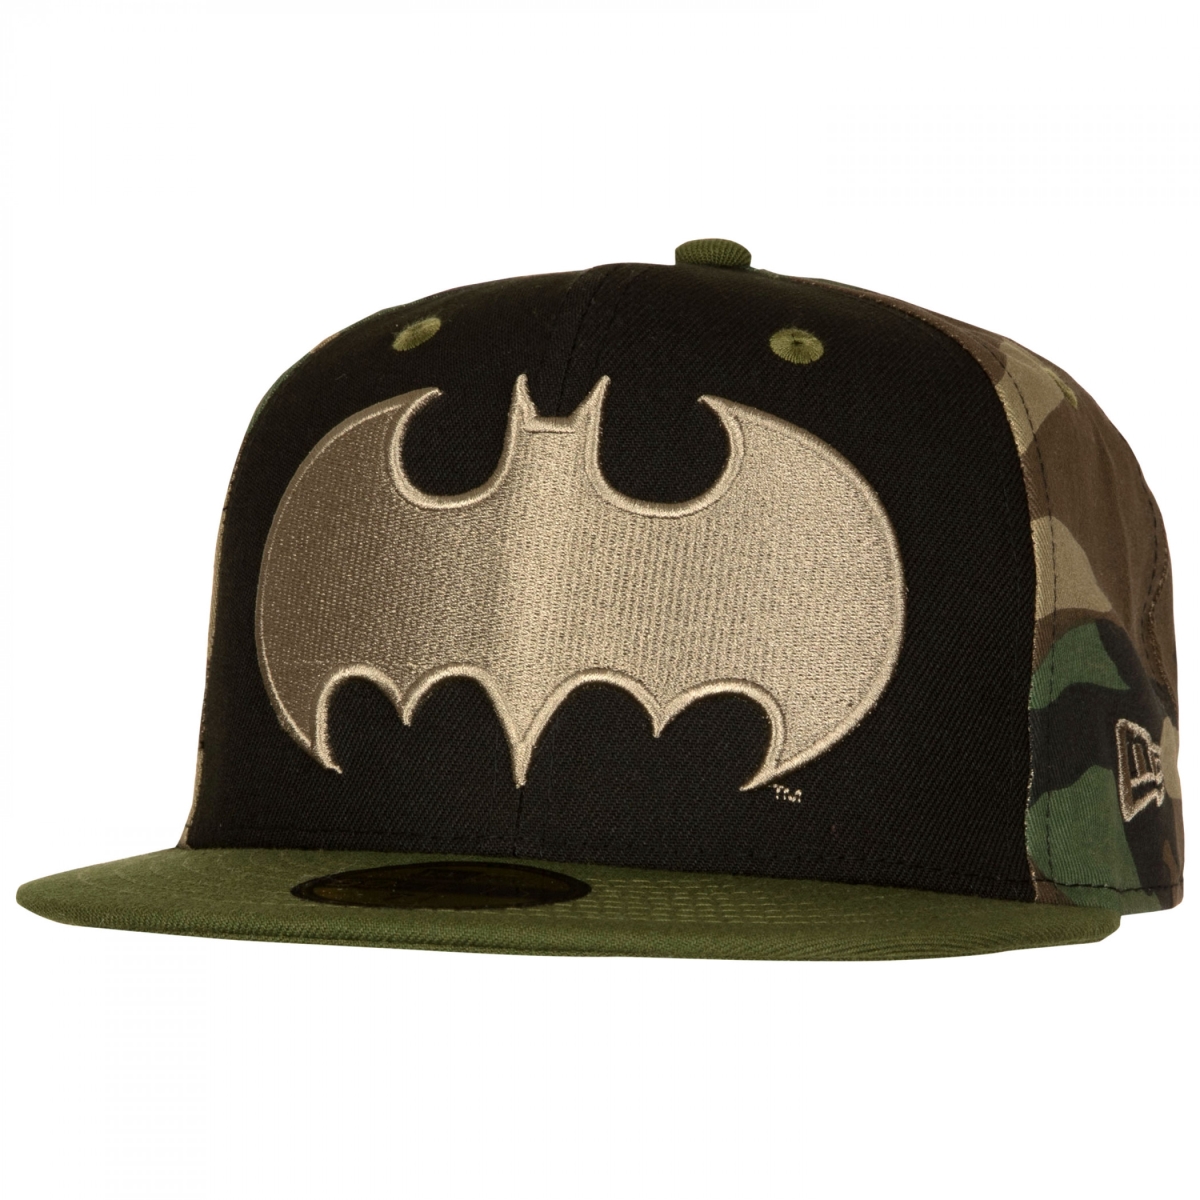 Picture of Batman 855153-75-8fitte Batman Camo Panel New Era 59Fifty Fitted Hat - 7.625 Fitted